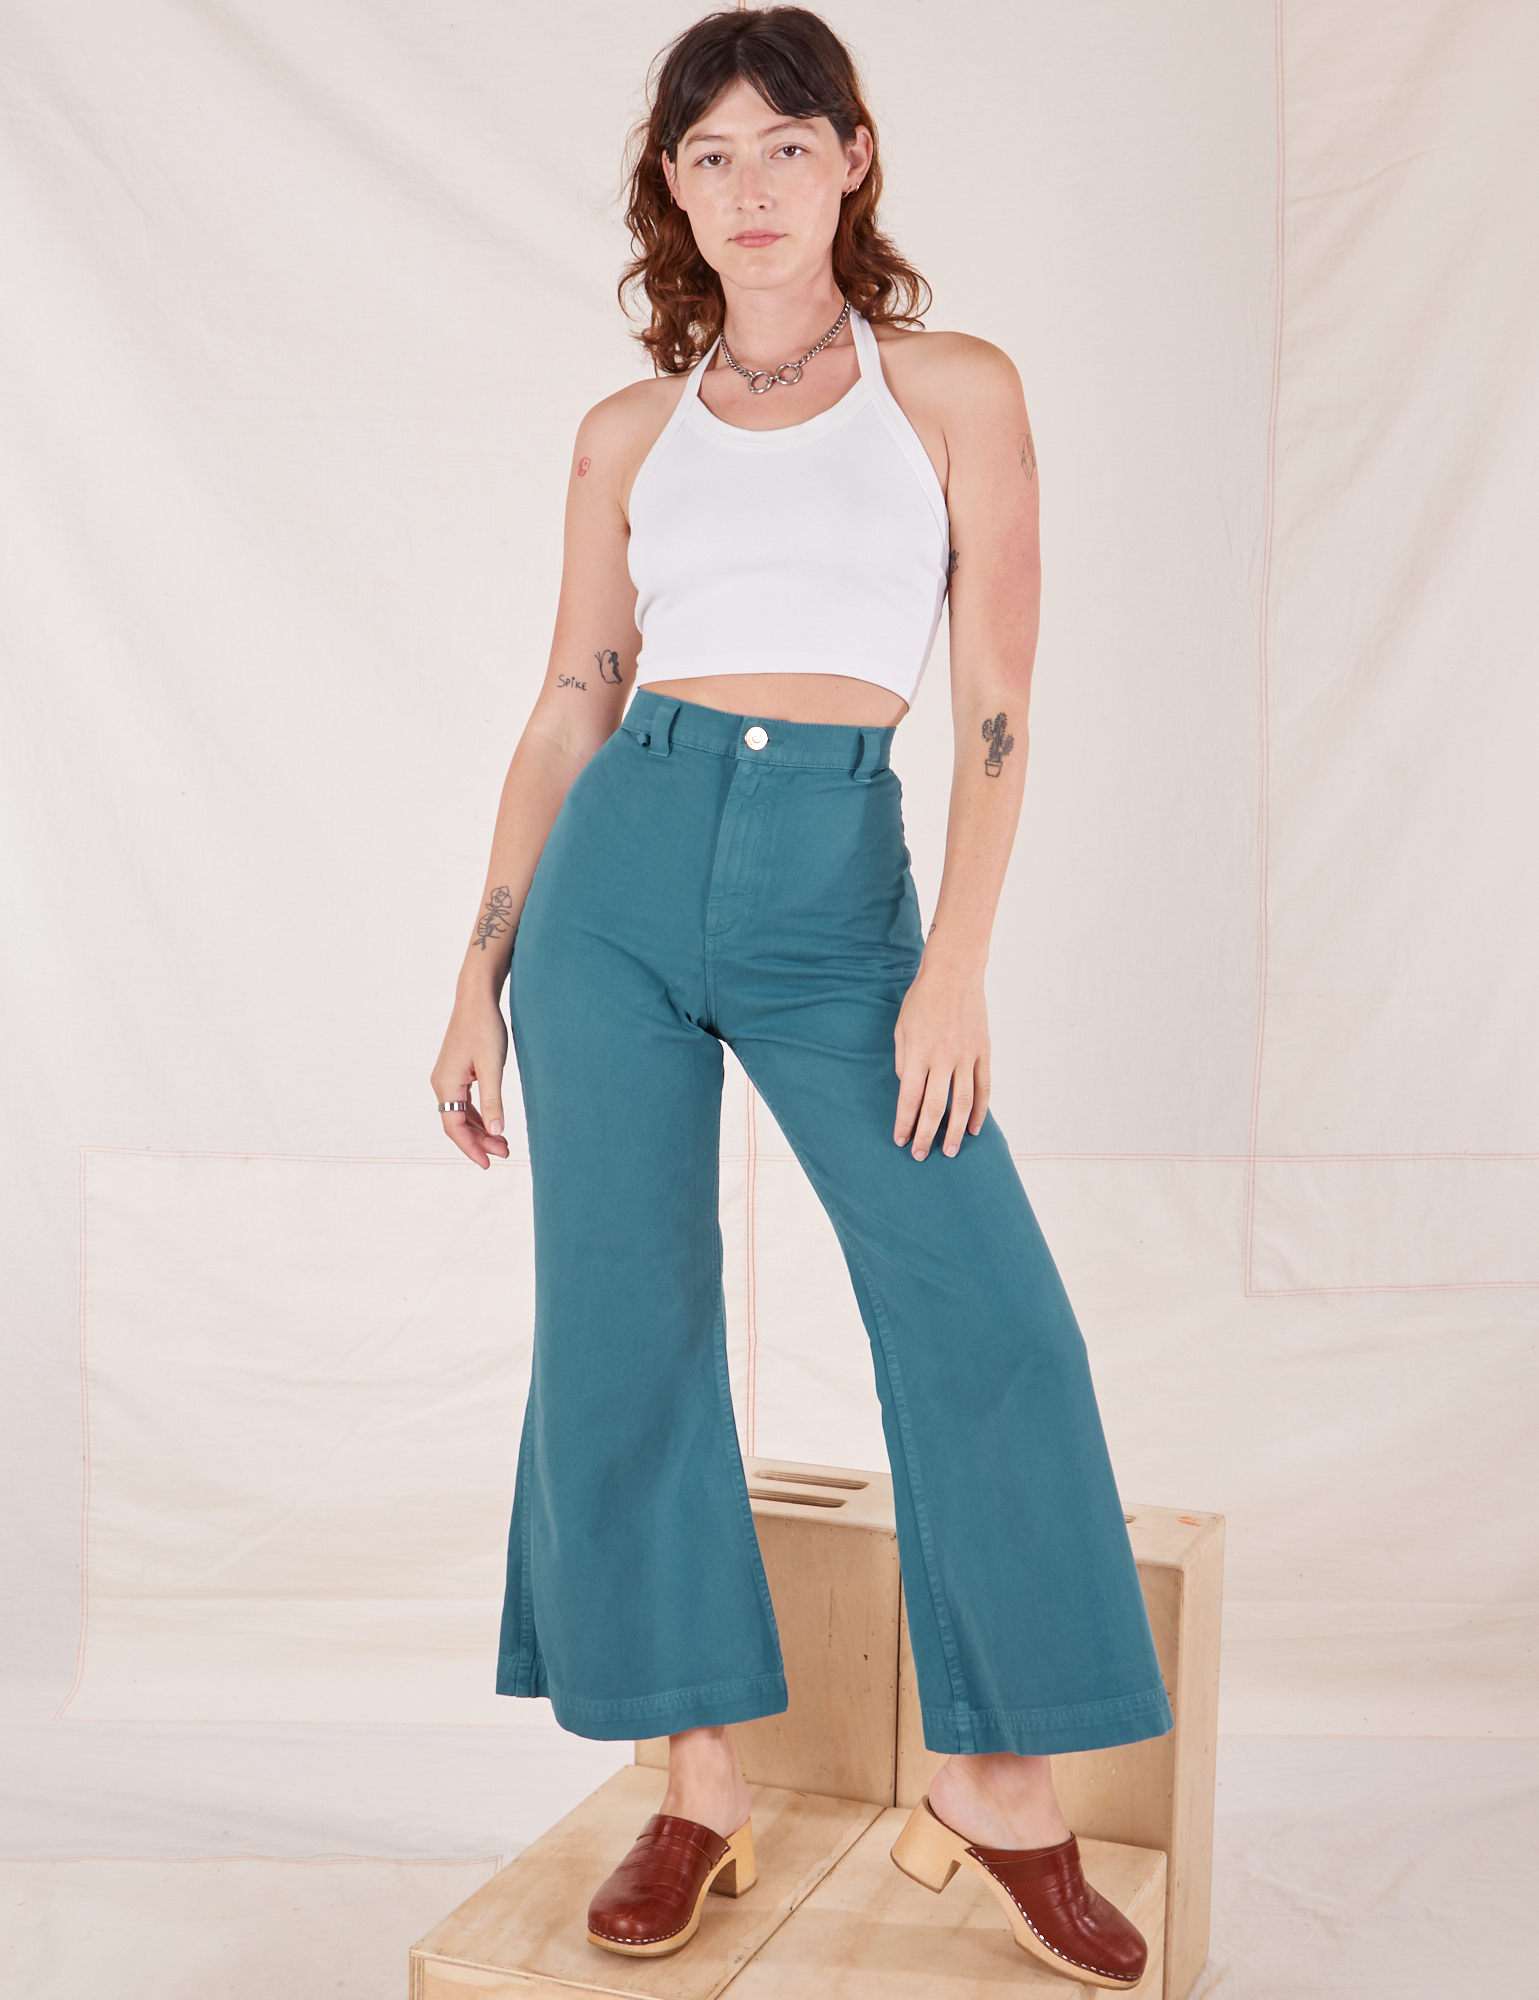 Alex is 5&#39;8&quot; and wearing XXS Bell Bottoms in Marine Blue paired with vintage off-white Halter Top